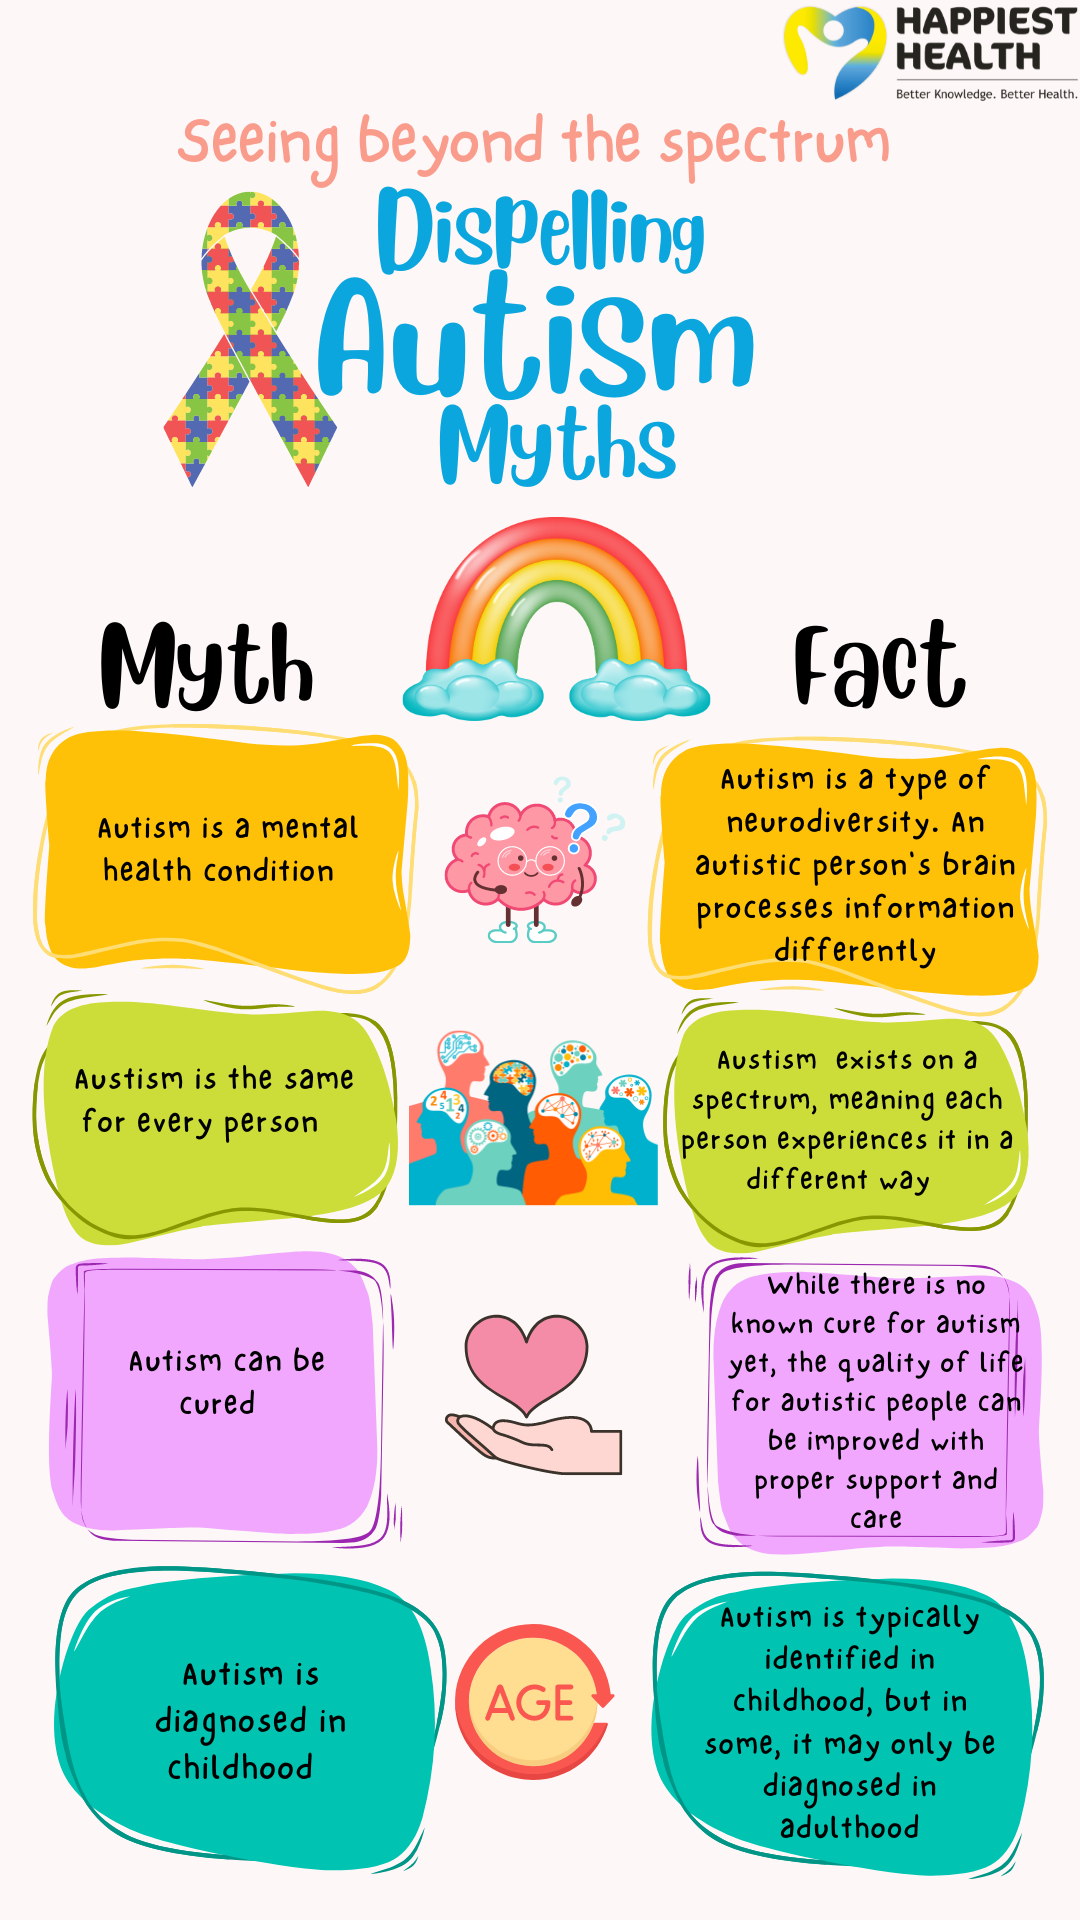 In this infographic, we dispel four prevalent myths about autism, aiming to promote greater acceptance and support for people on the spectrum.